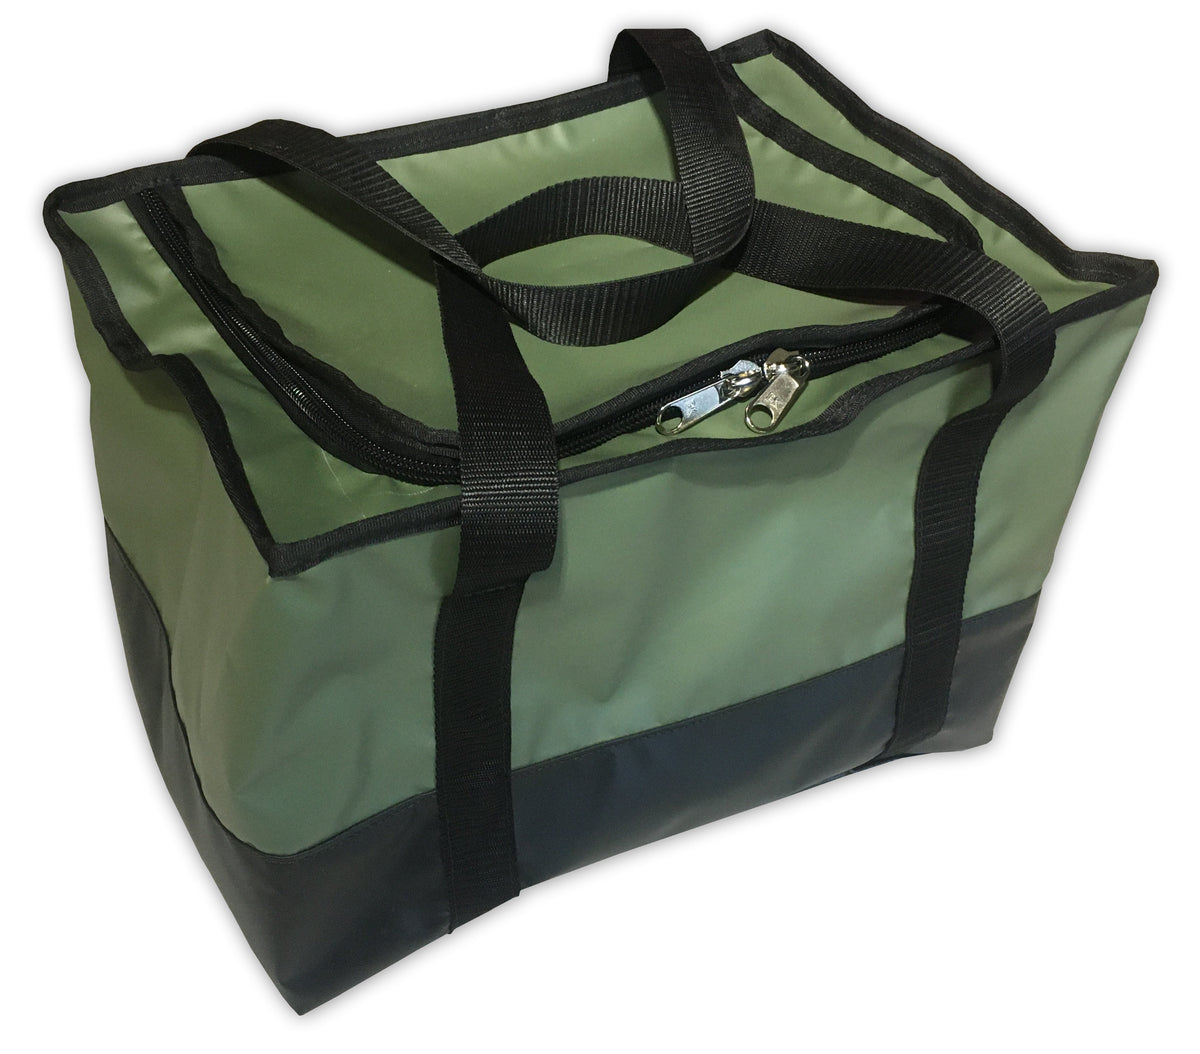 Olive green 4x4 and horse racing gear bag